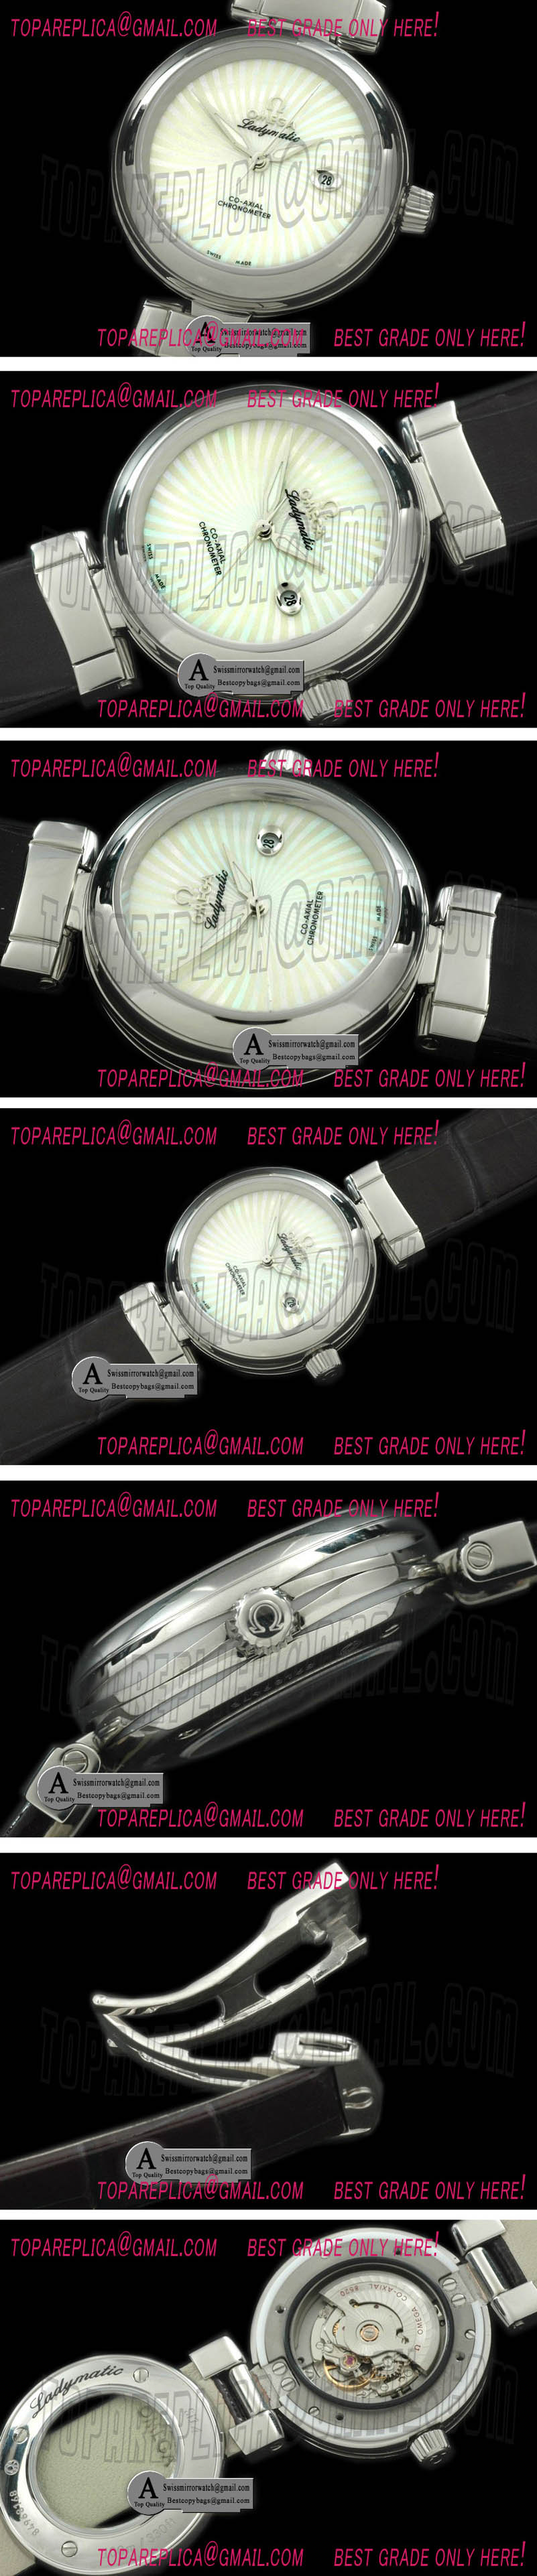 Omega 425.33.34.20.55.001 Deville Ladymatic SS/Leather White S-2671 Replica Watches